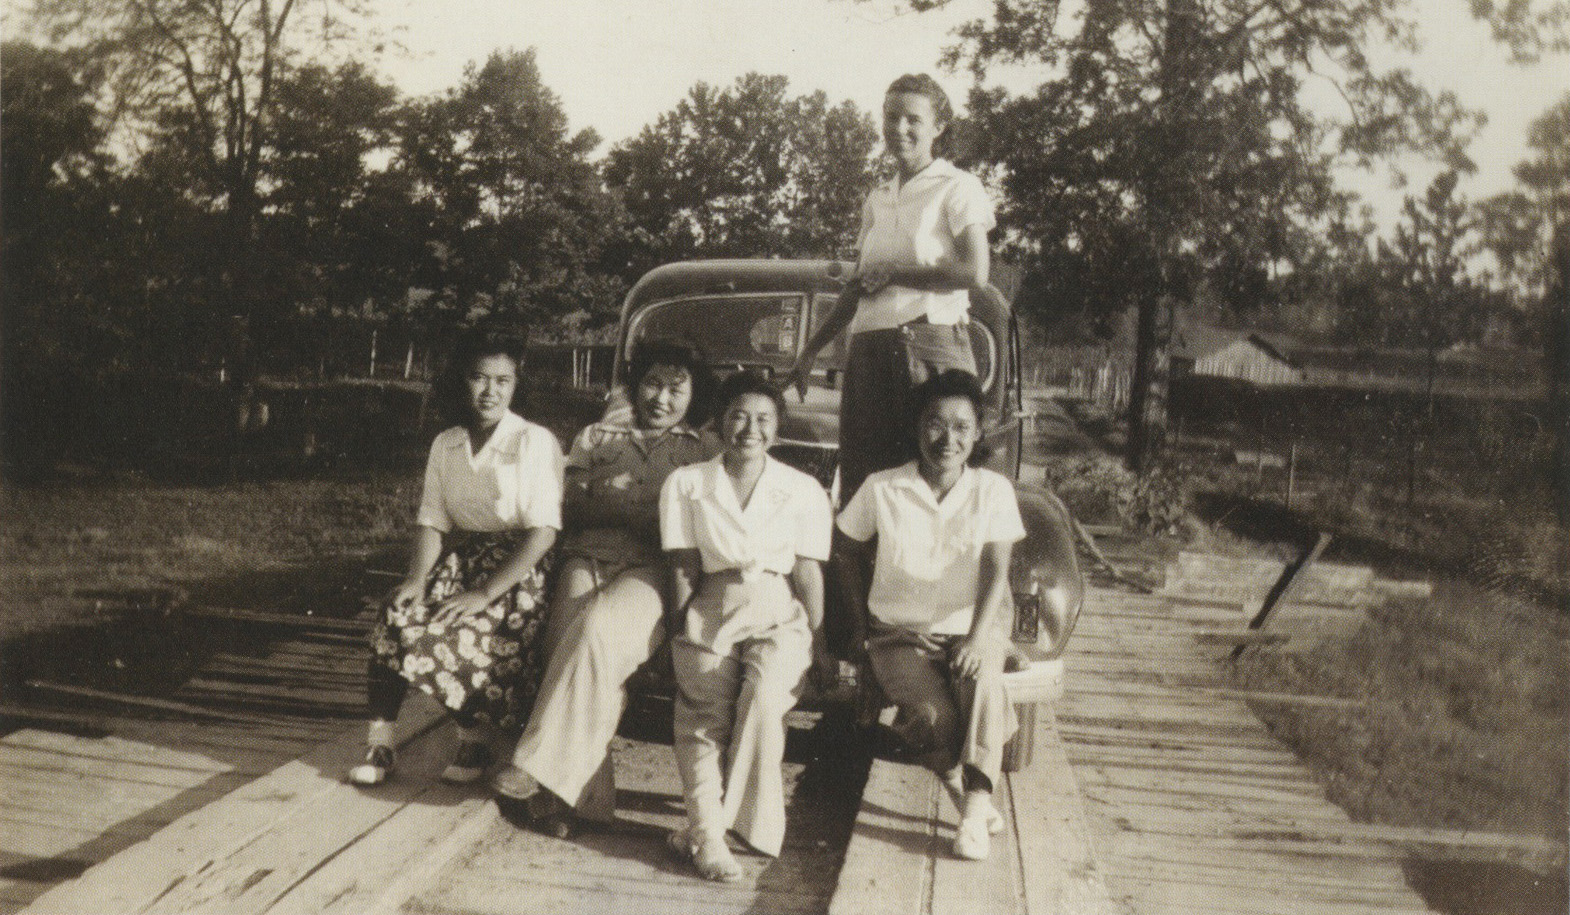 Ruth (second from left) and her teacher, Mrs. Beasley (standing), with other students at Rohwer, 1943. Photograph by Mabel Rose Jamison.